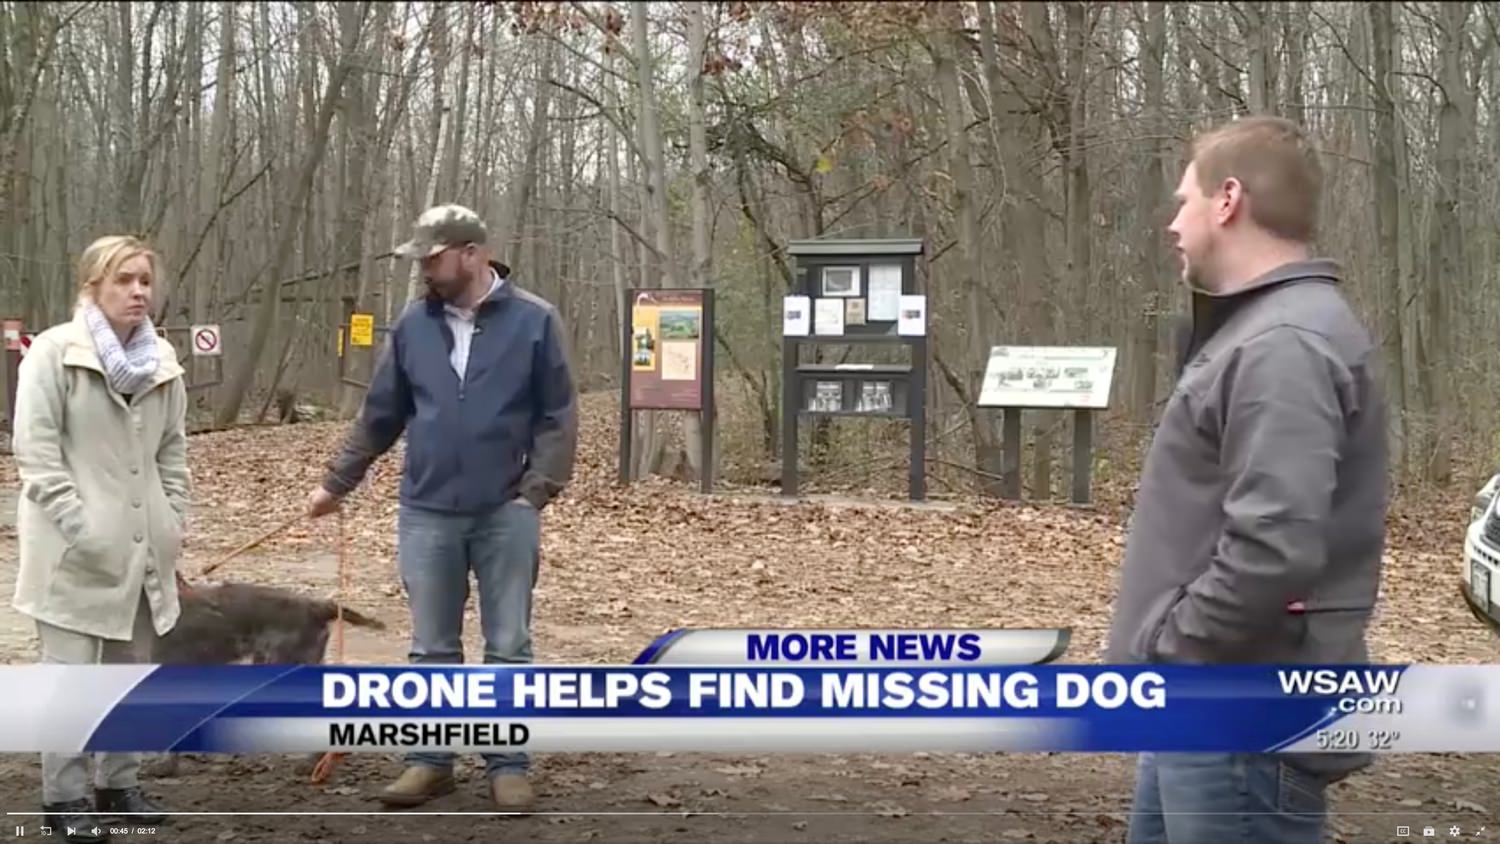 Missing dog found after 3 days with help from DJI Inspire drone